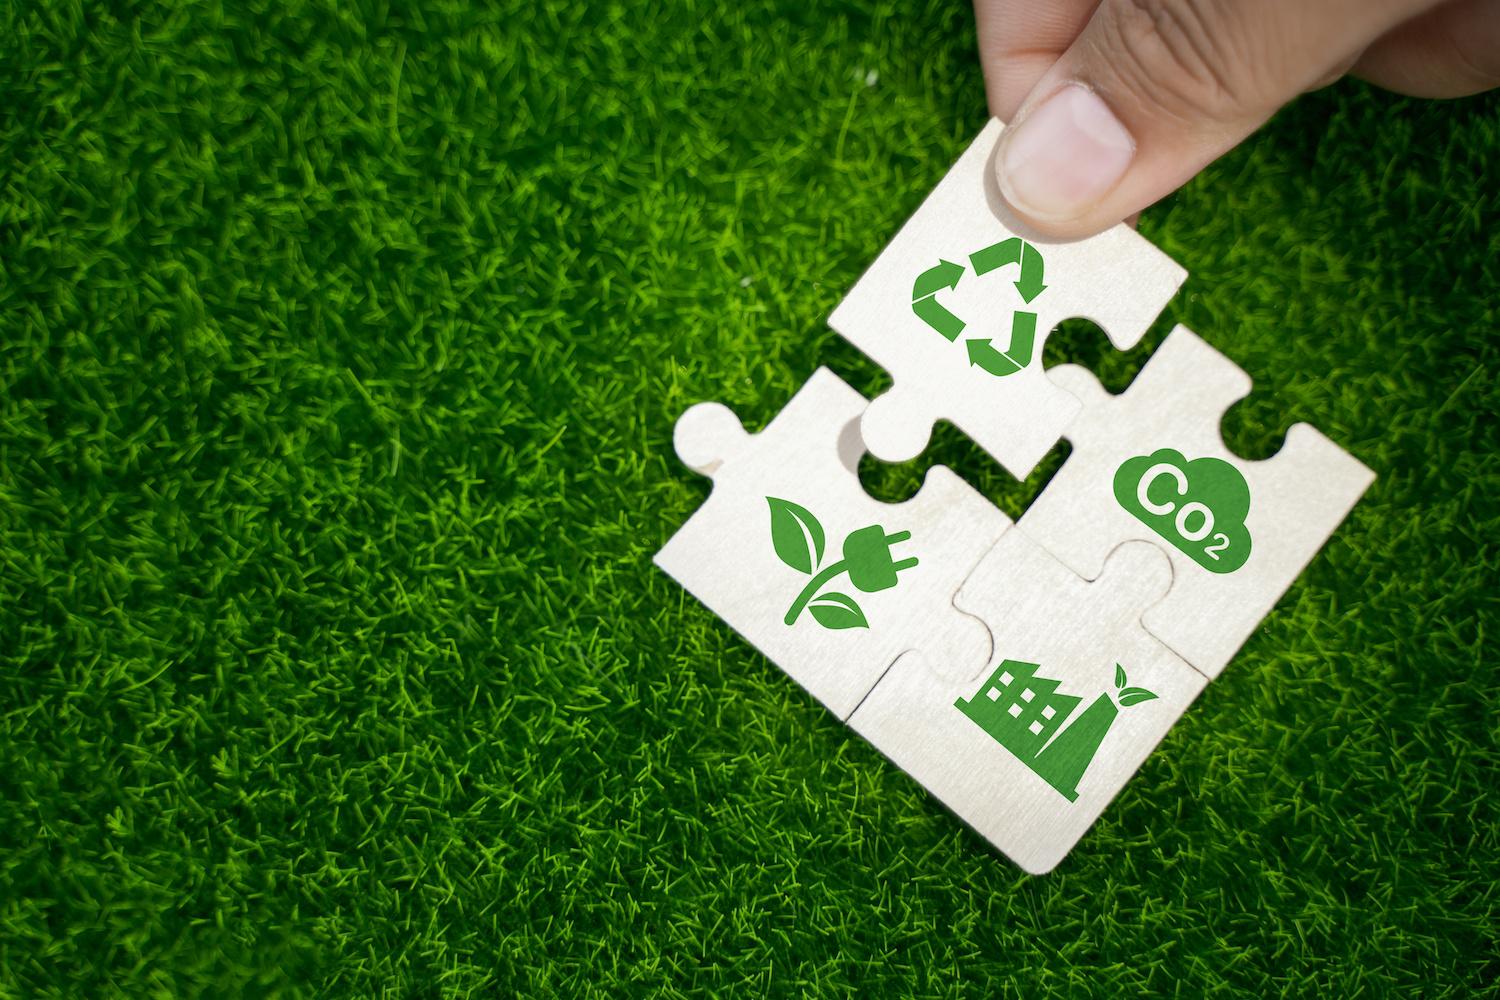 puzzle pieces representing ESG and sustainability - recycling reducing emissions